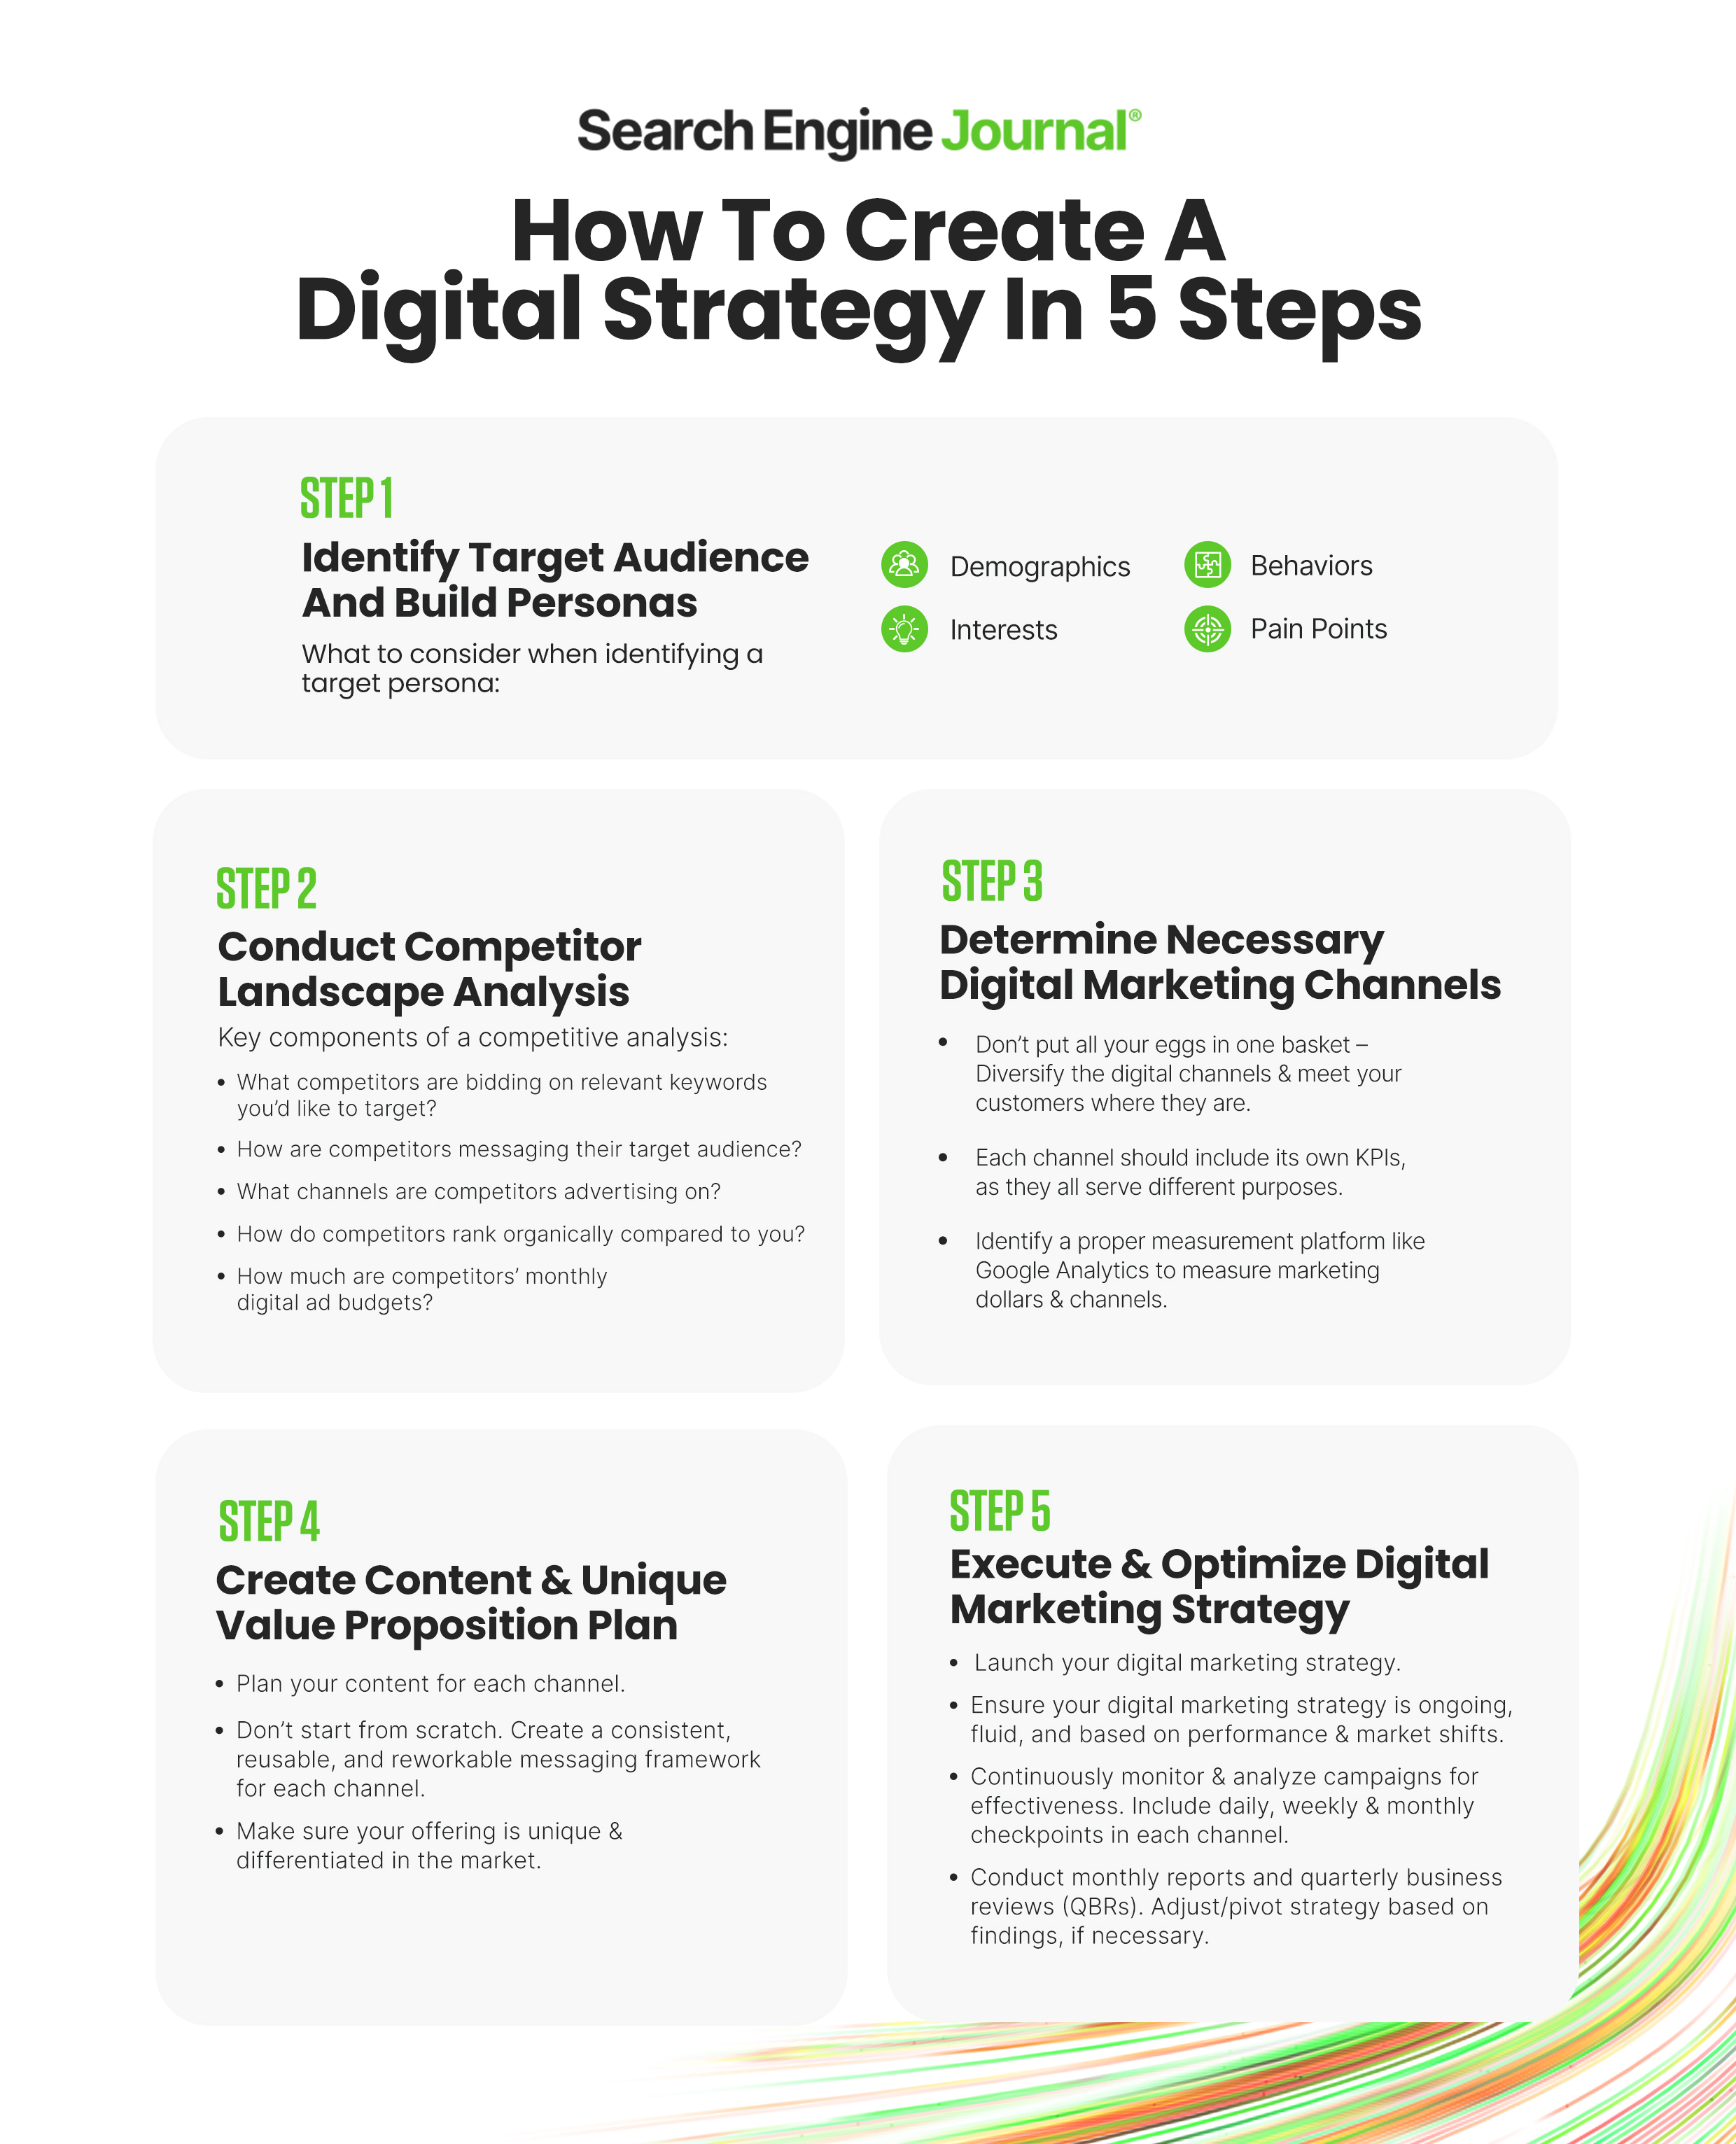 5 Steps to Create a Digital Strategy SEJ May2023 - What Is A Digital Marketing Strategy? 5 Steps To Create One